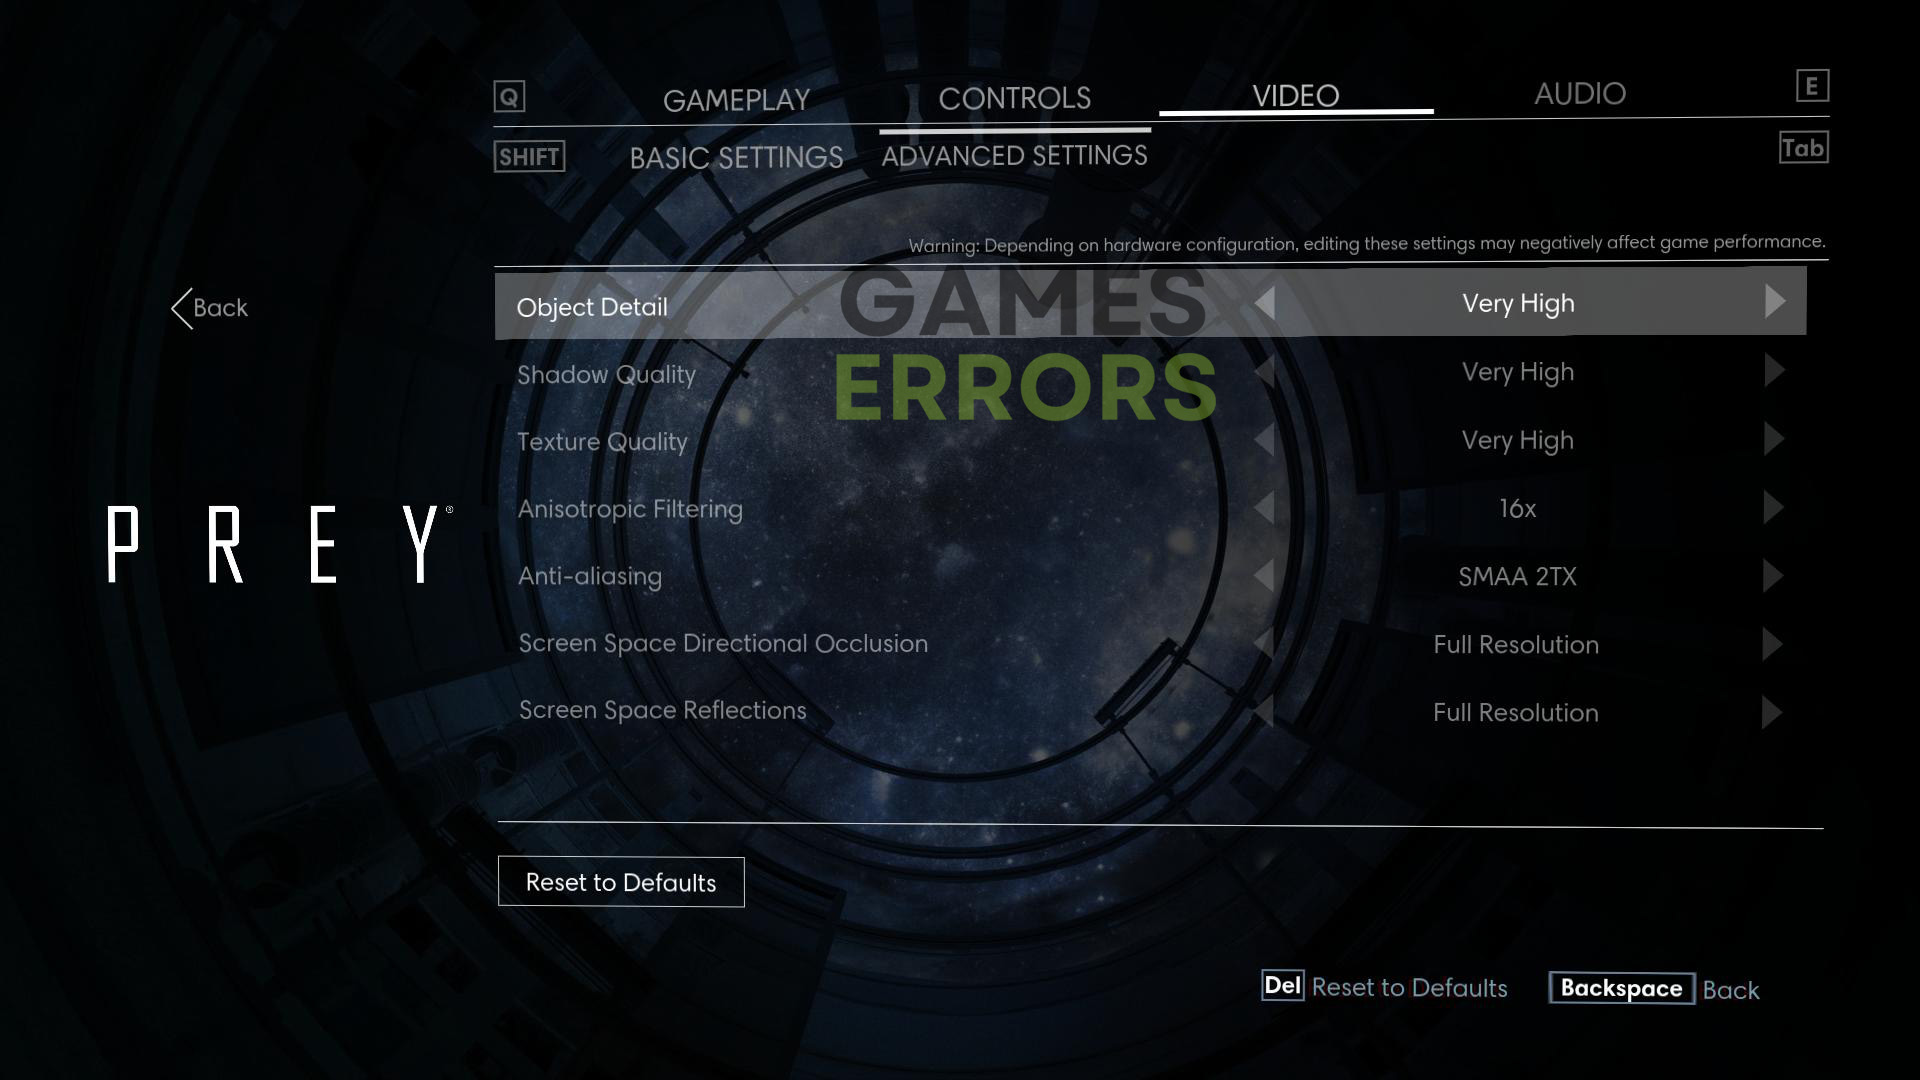 Lower the graphical settings of the game to reduce the strain on your system.
Verify the integrity of the game files through the game launcher or platform.